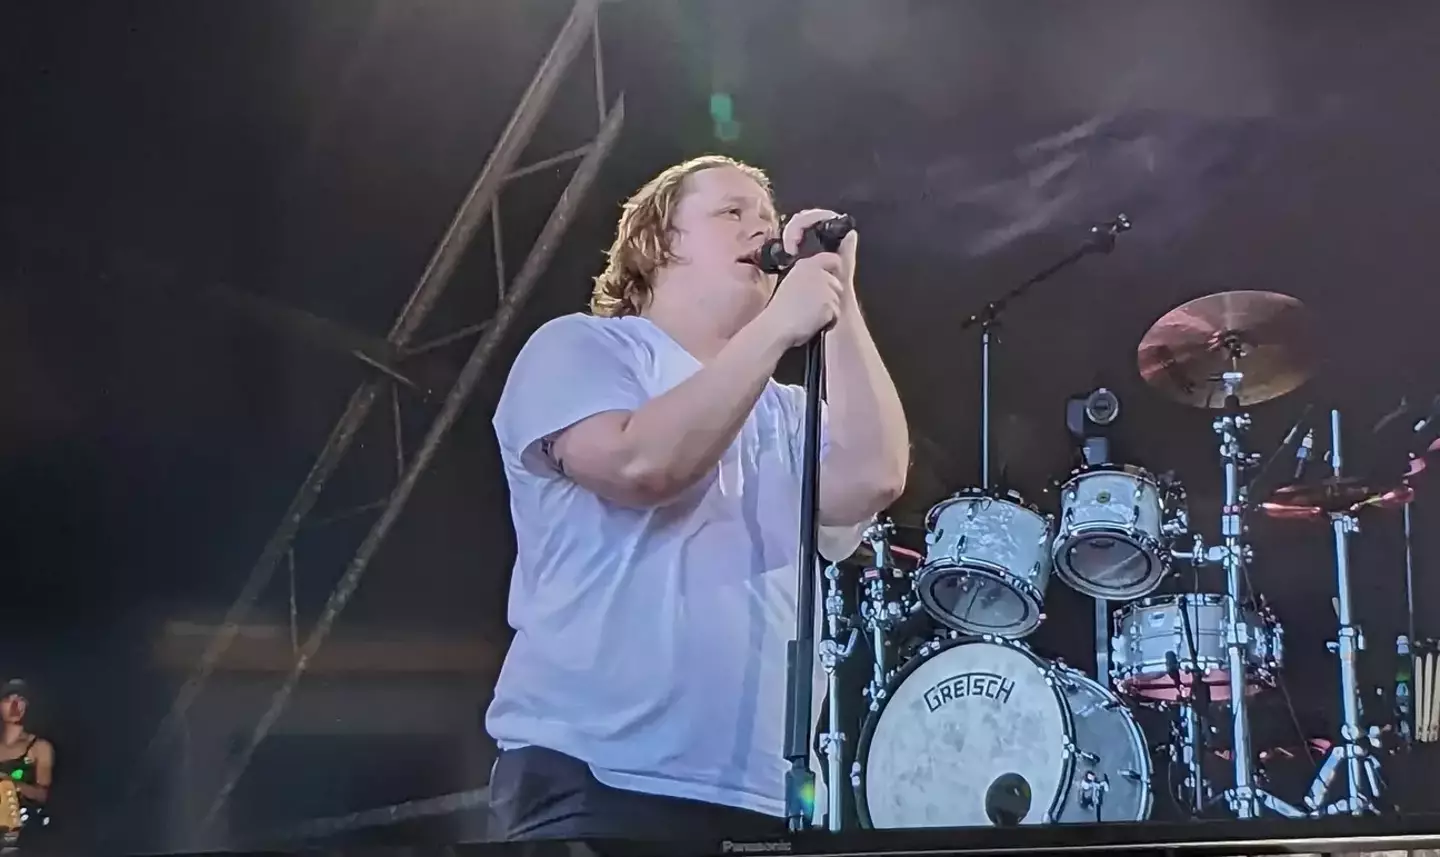 Lewis Capaldi called his Glastonbury set a 's***show' as fans helped him fill in the lyrics after he steadily lost his voice.